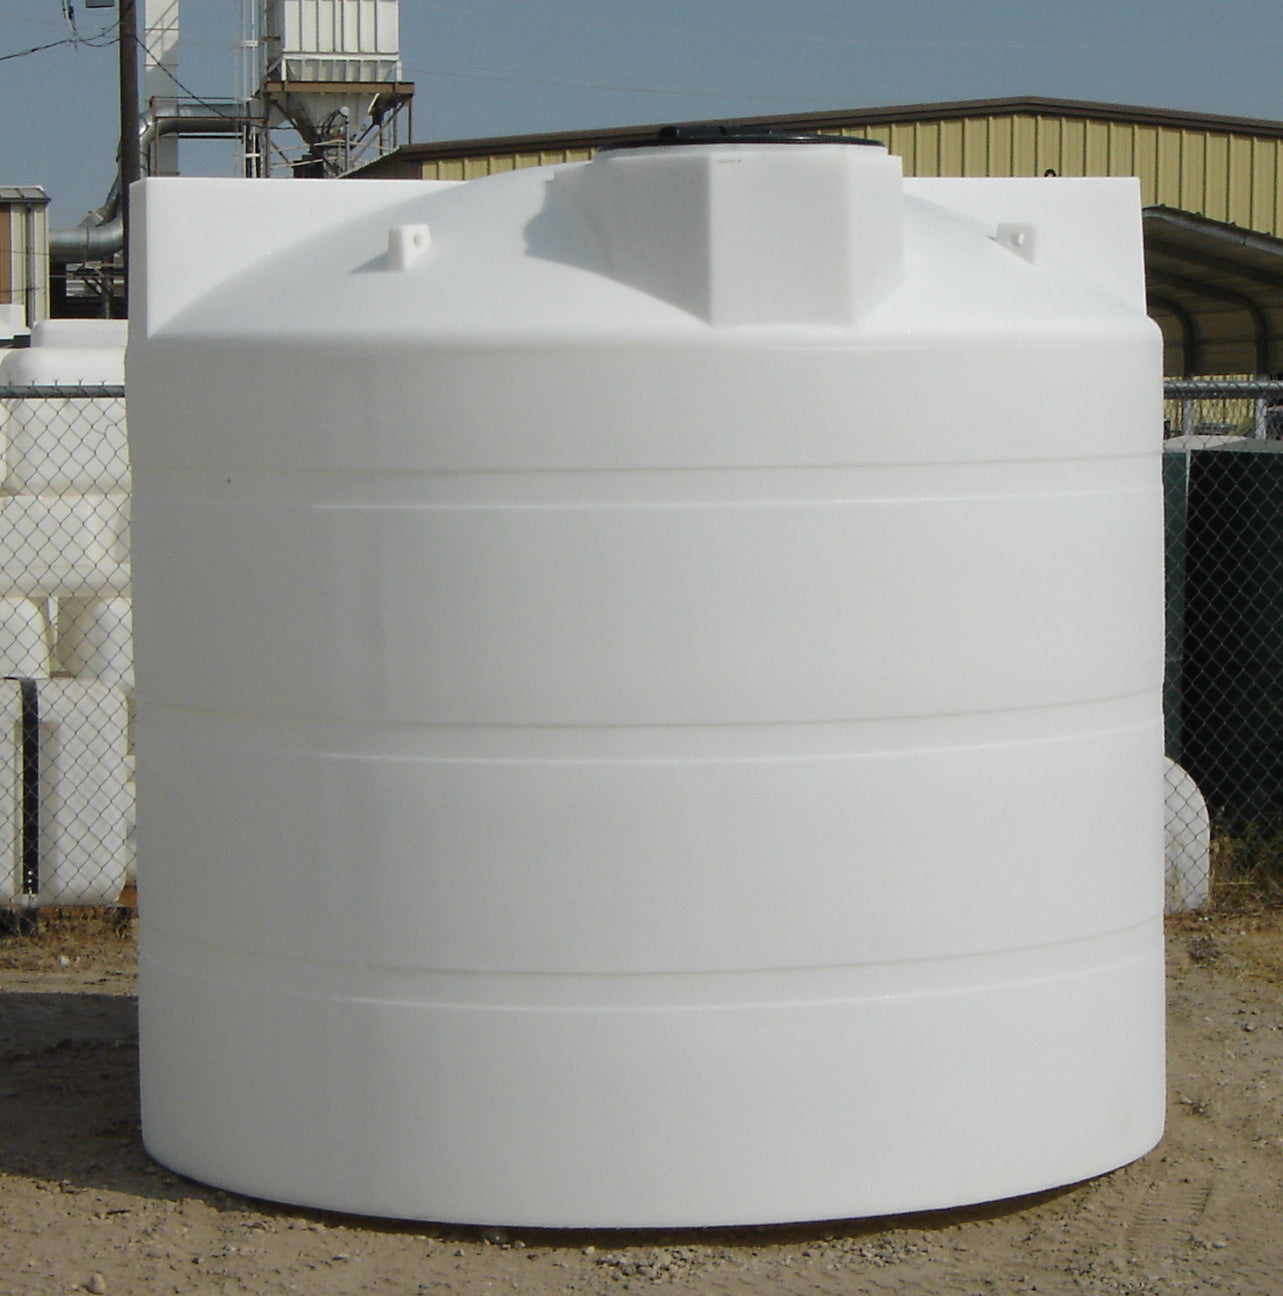 2500 gallon heavy duty | All About Tanks